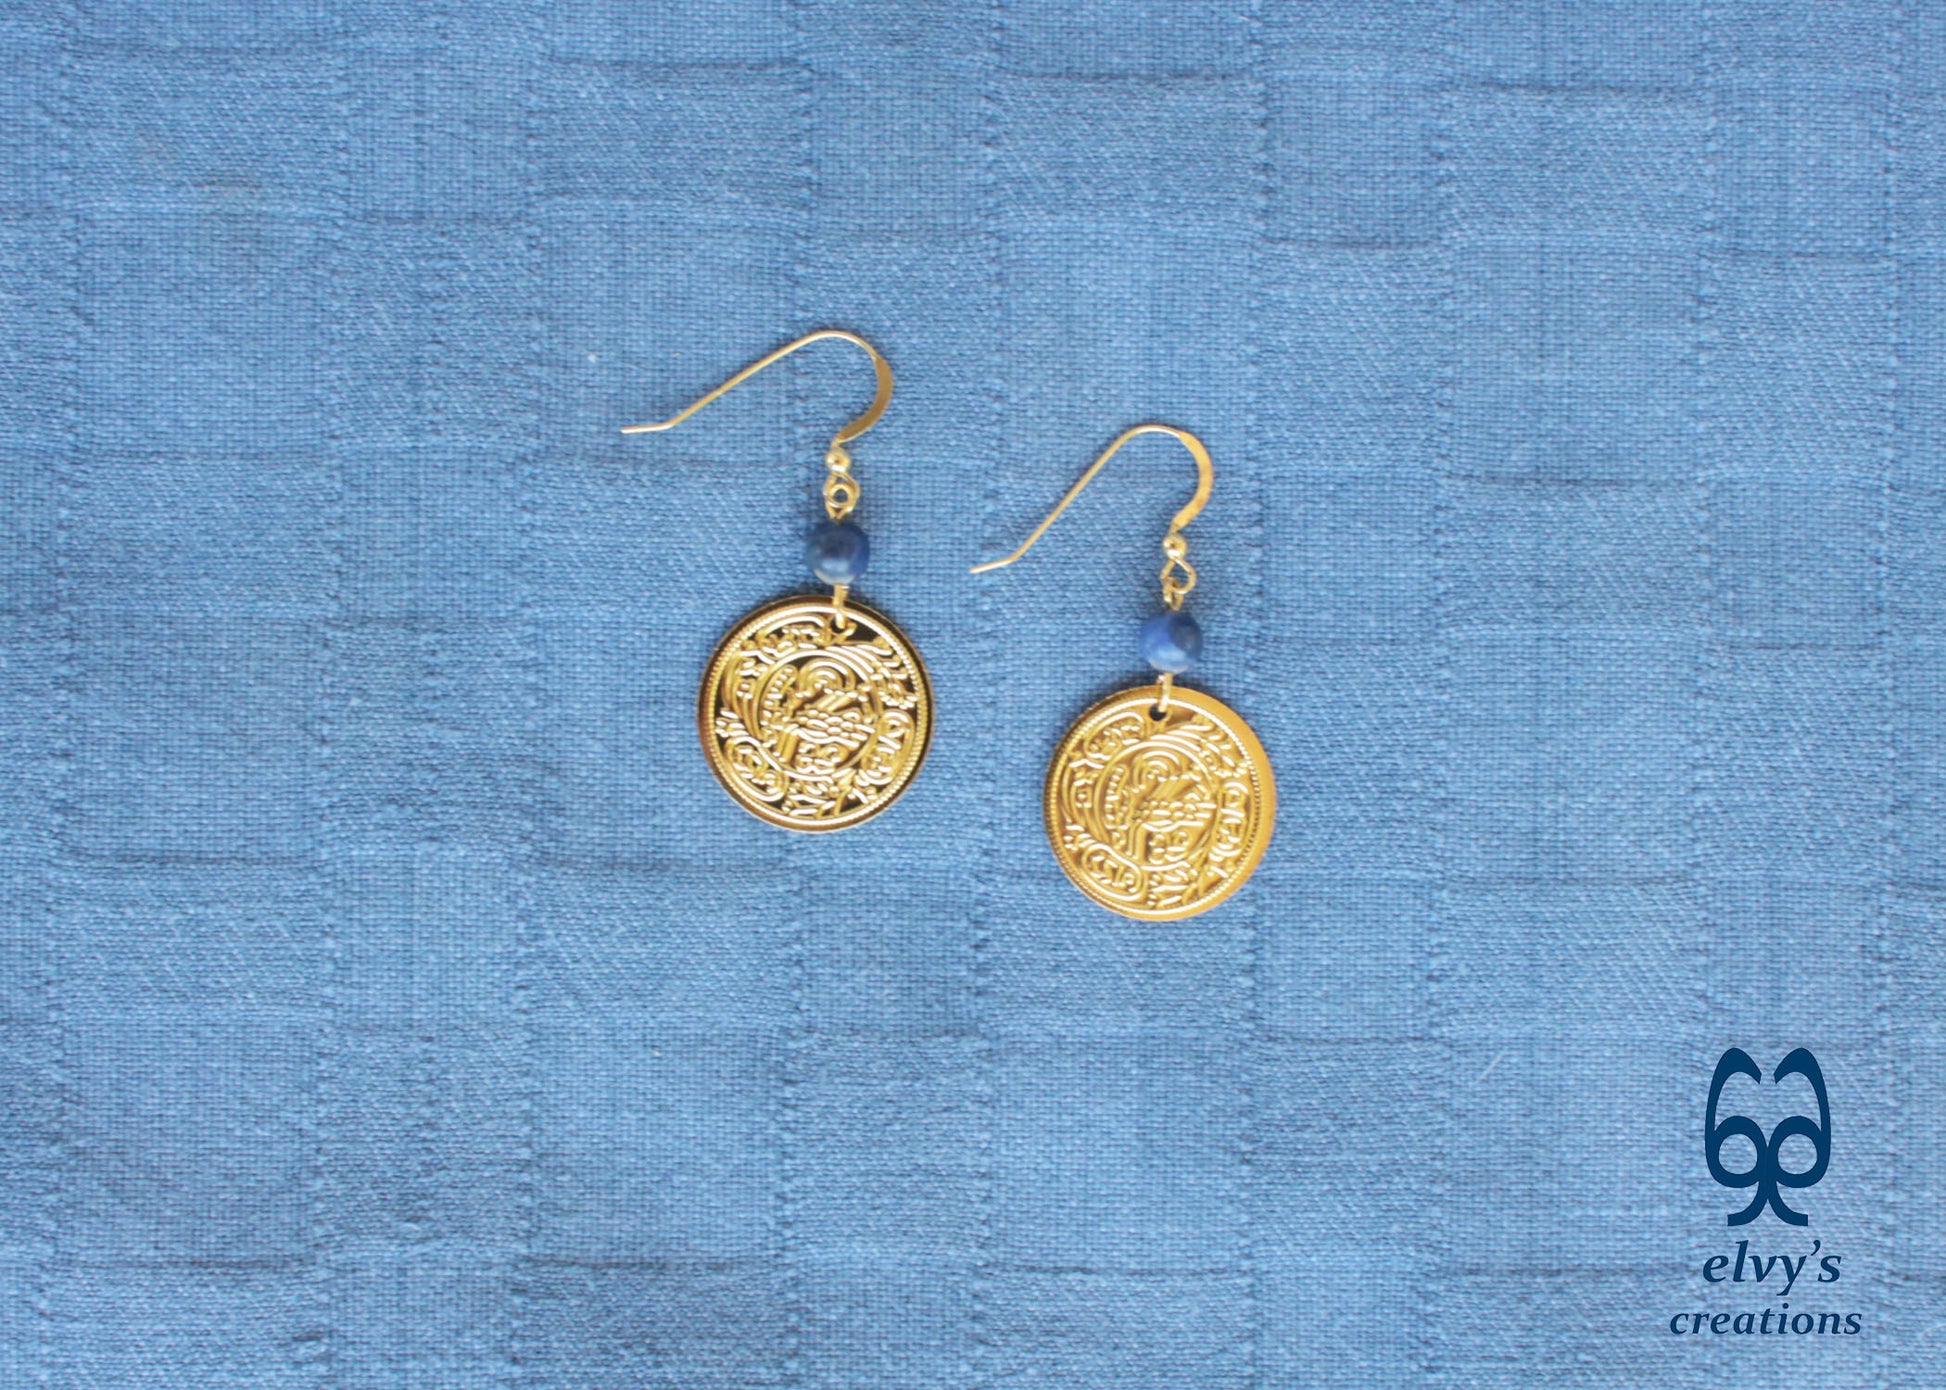 Gold Folklore Earrings Coin Dangle Drop Greek Traditional Jewelry 925 Sterling Silver Gold Plated Gypsy Jewelry Blue Sodalite Gemstone